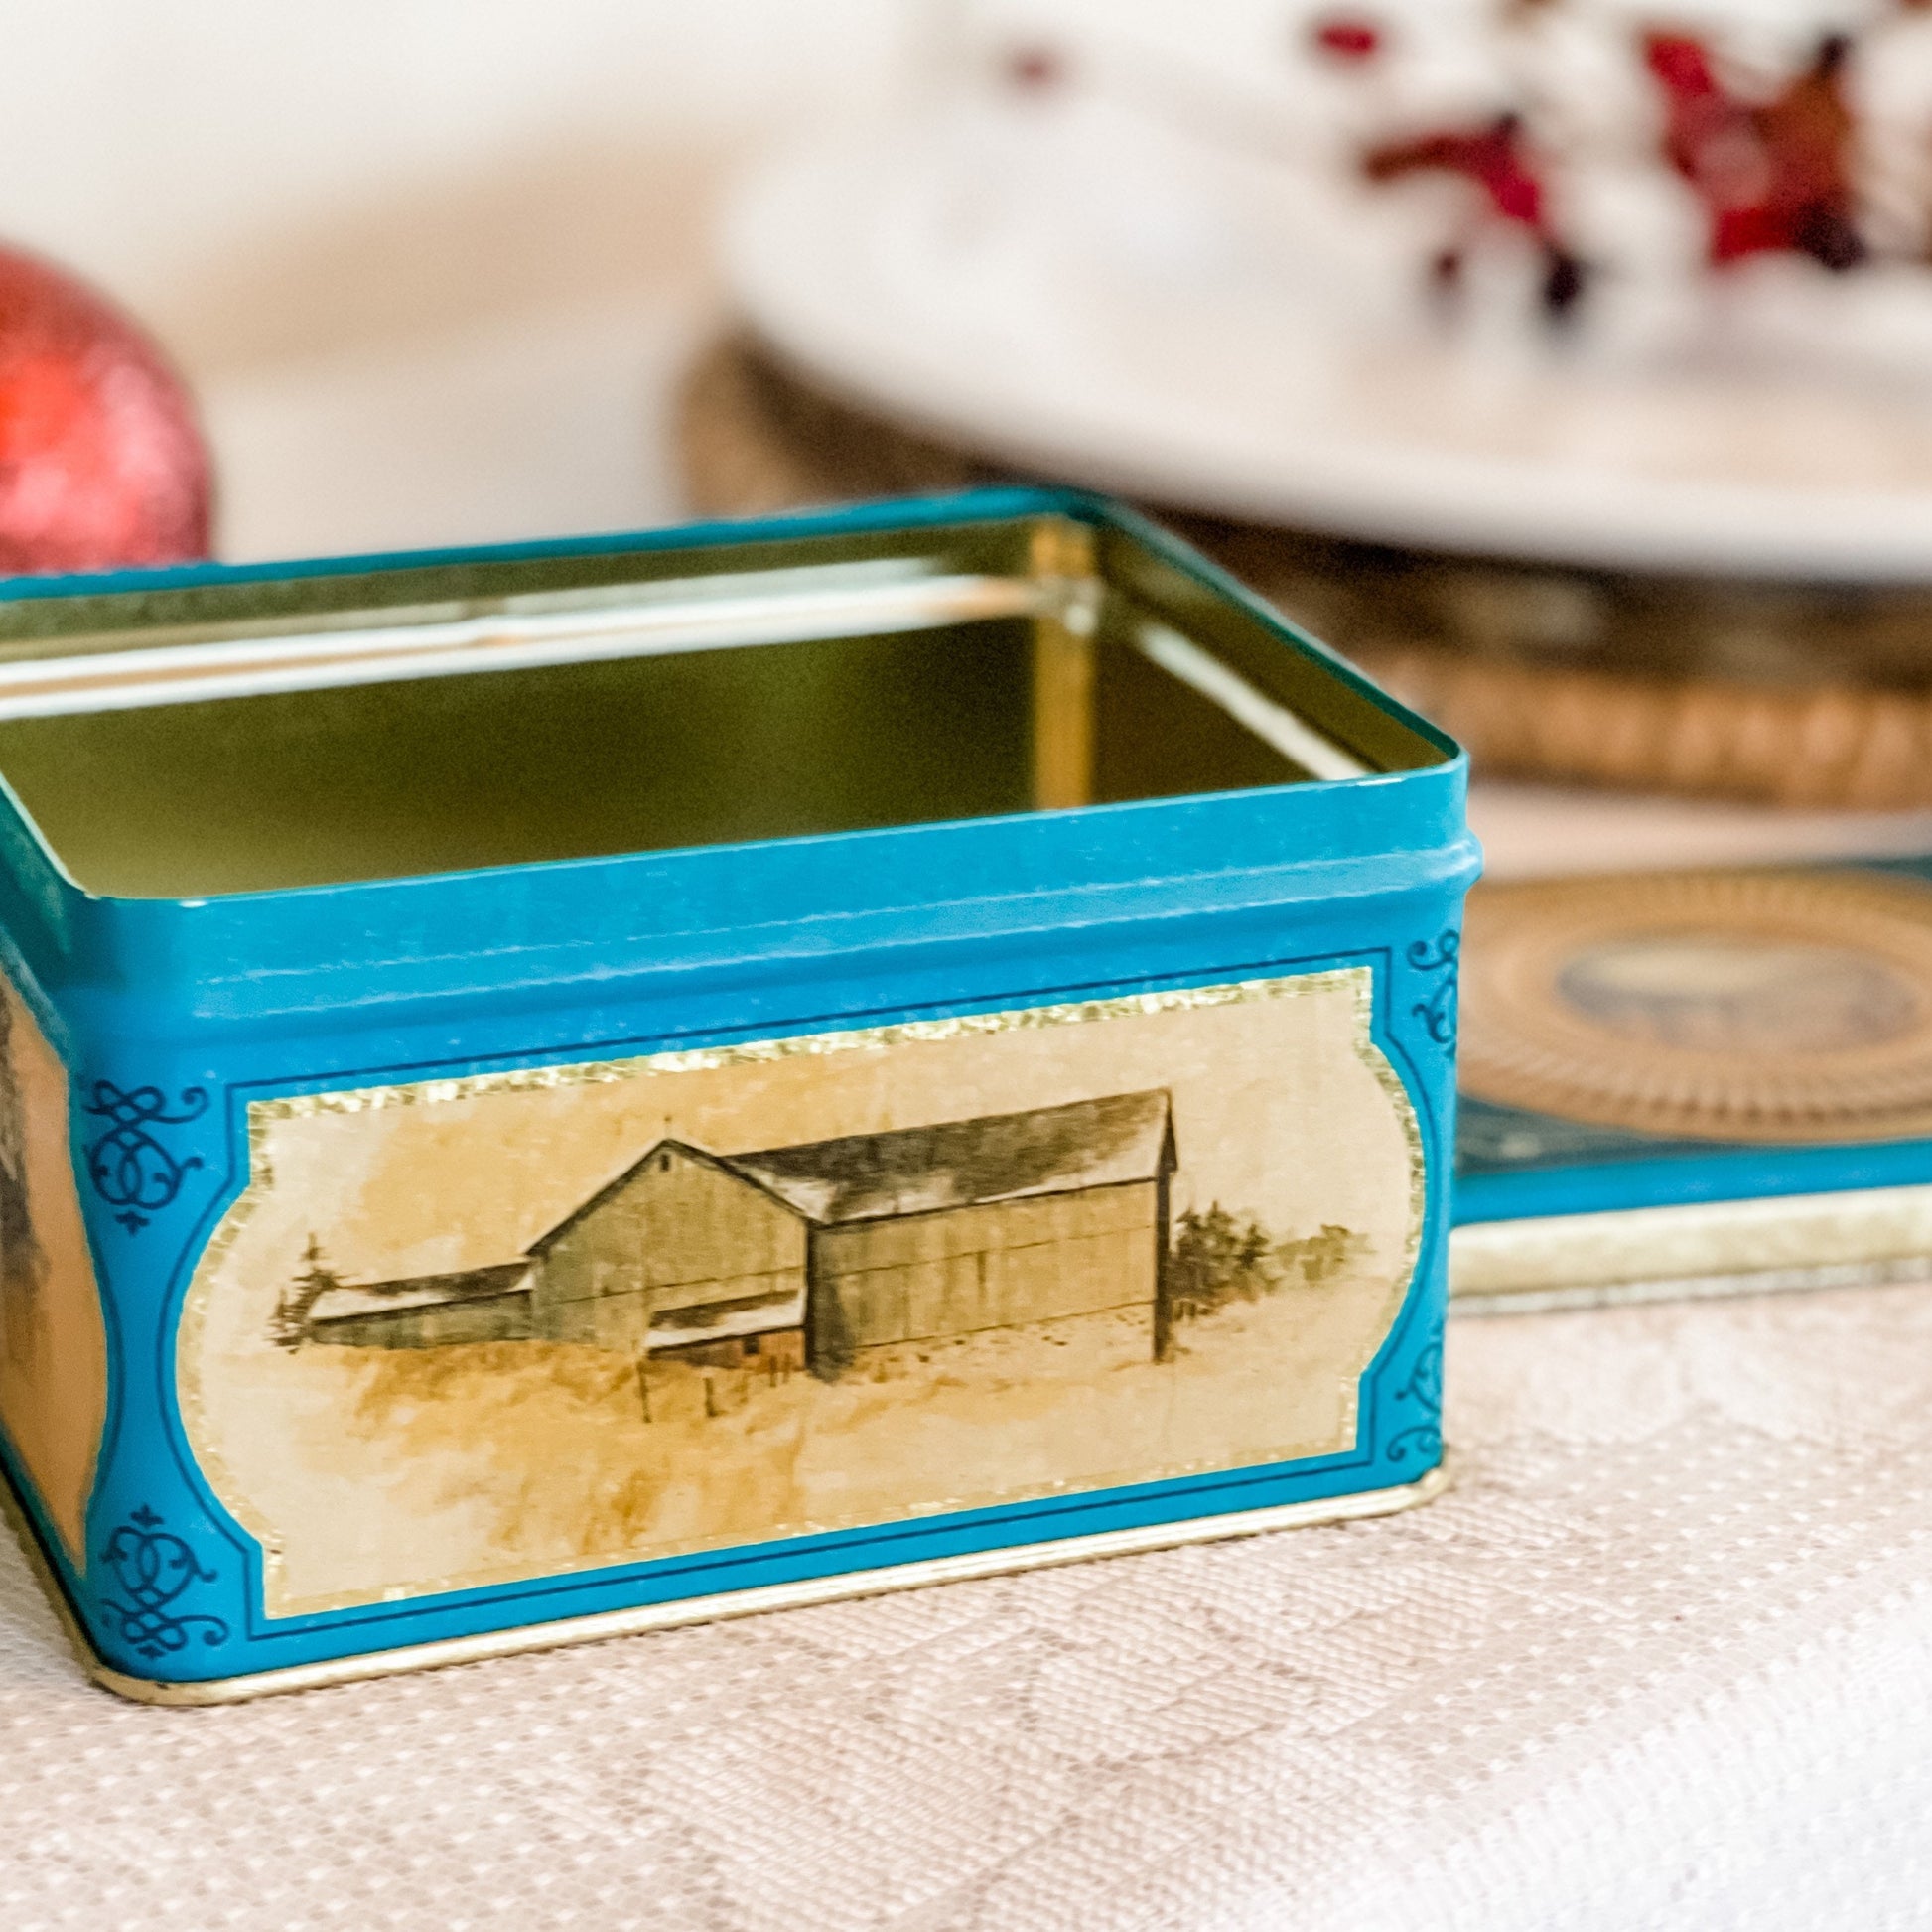 Scented Candle in Vintage Metal Biscuit Tin